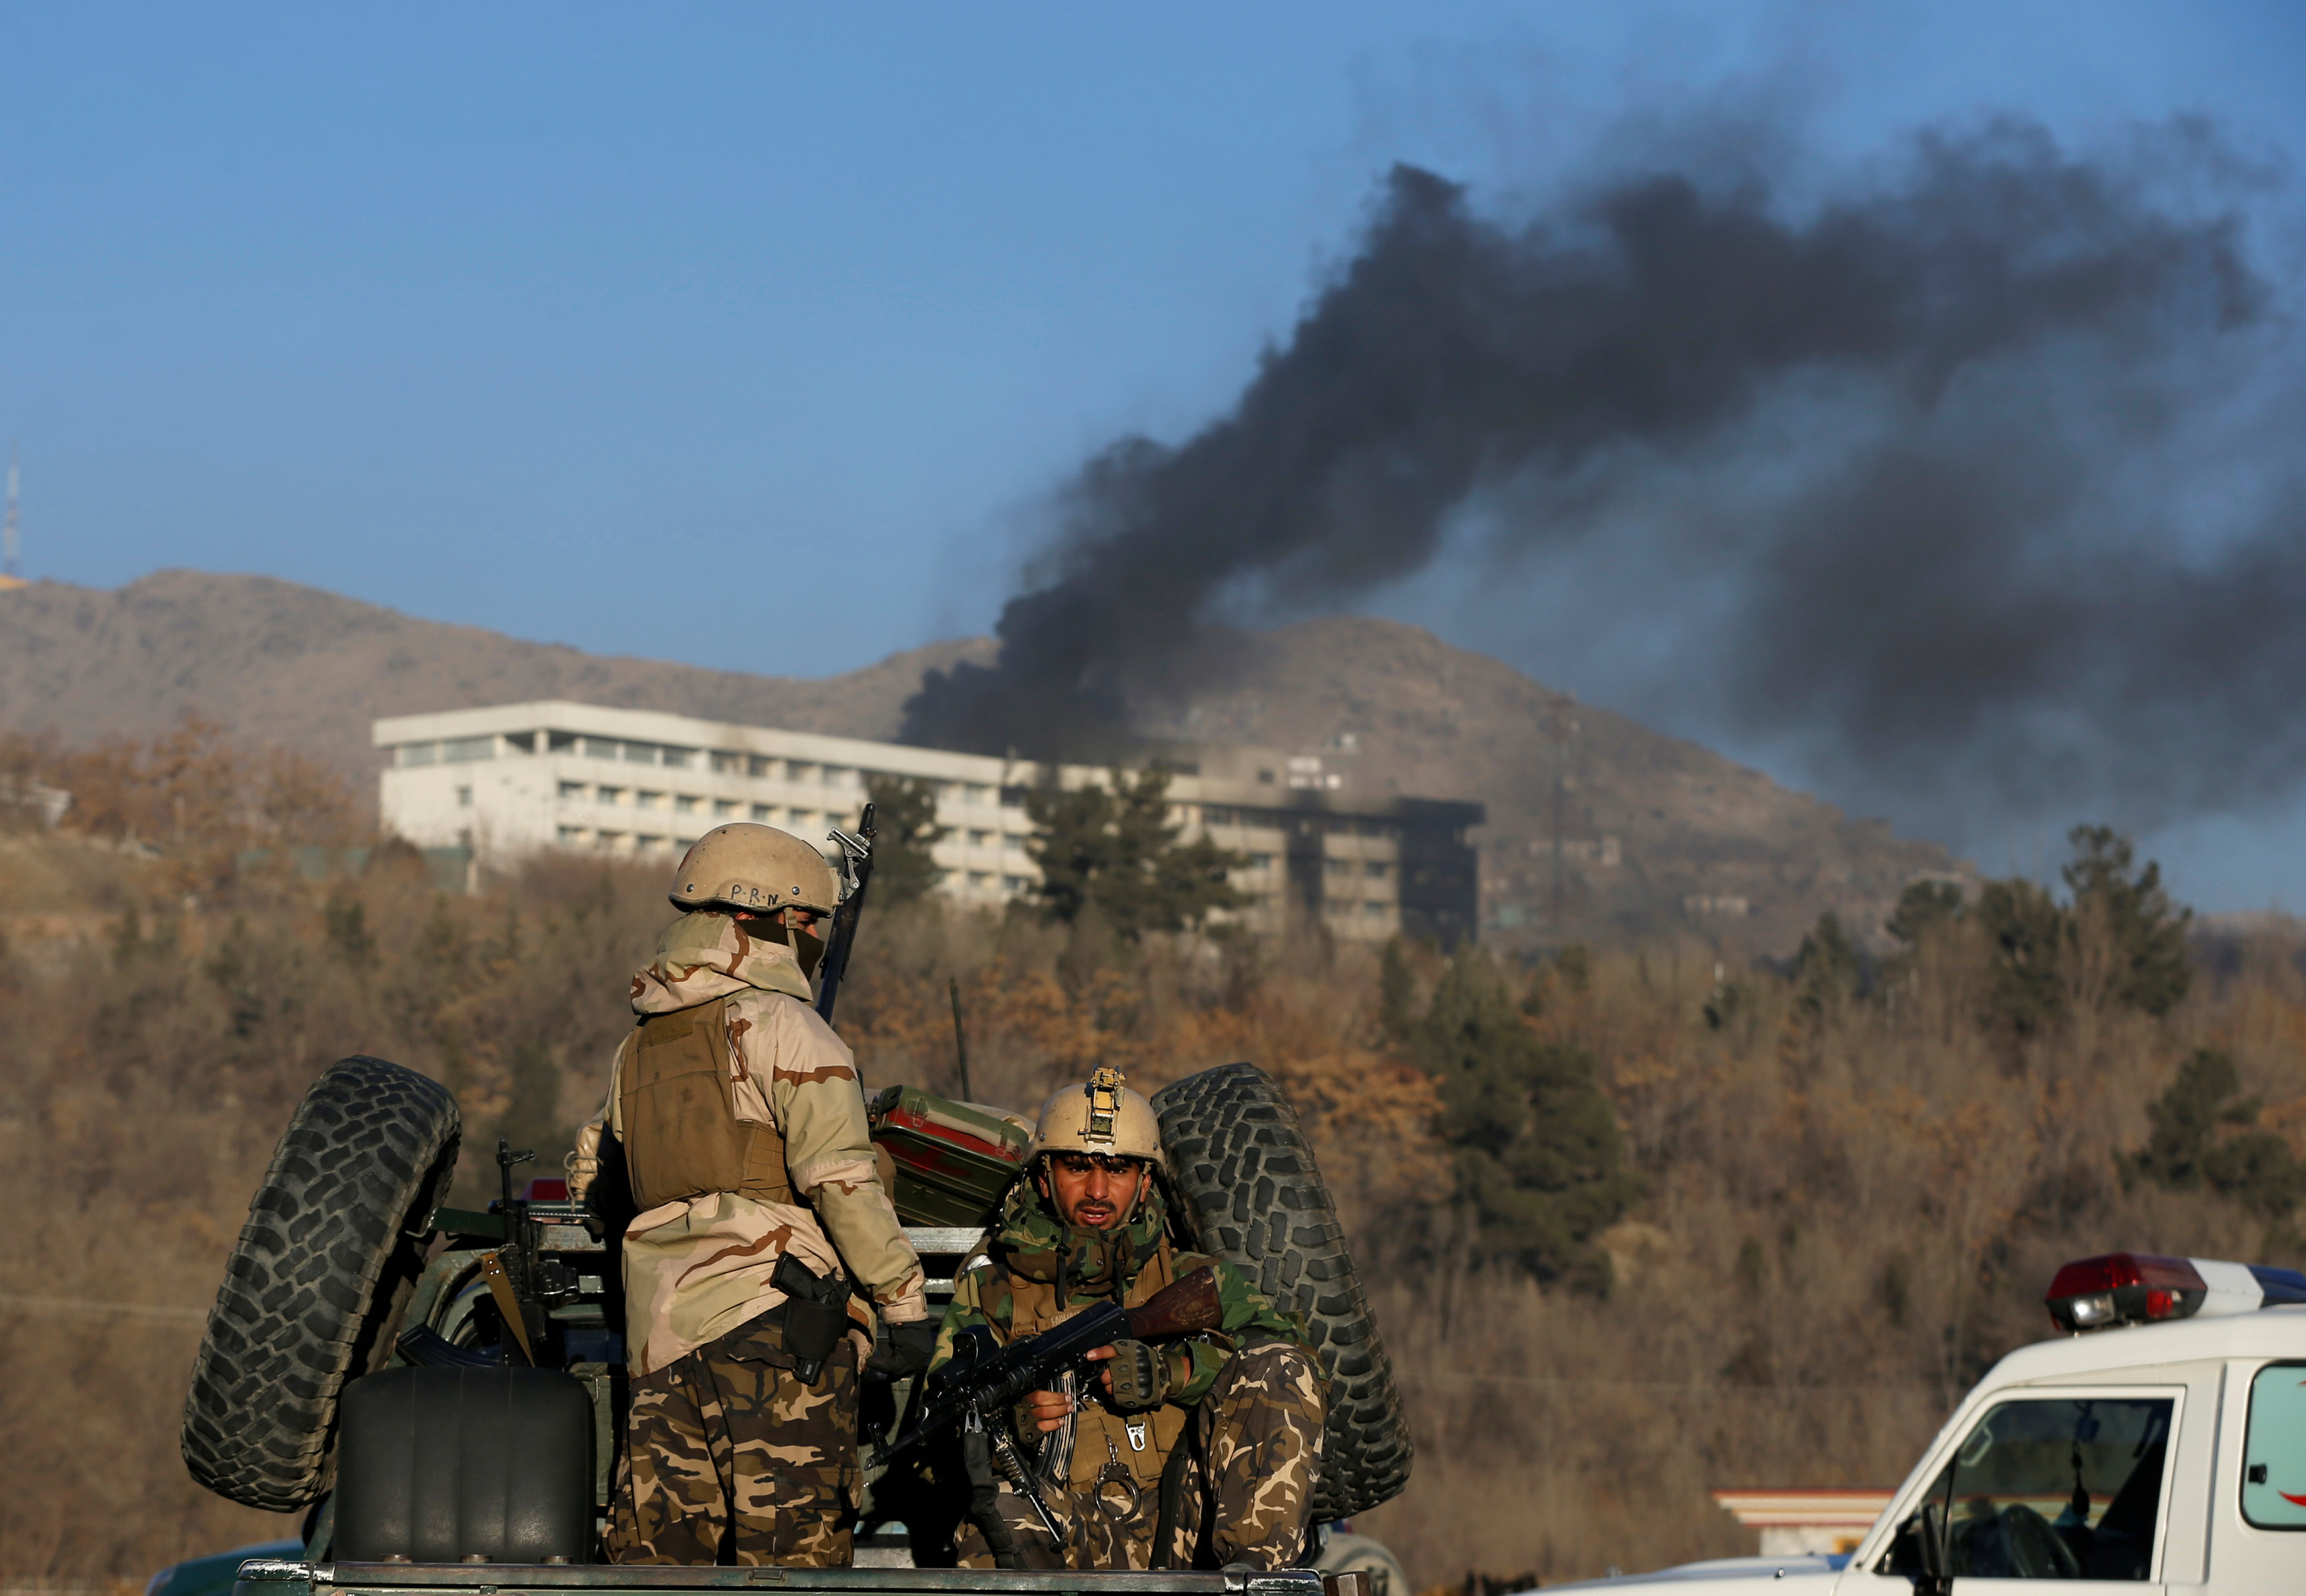 19 killed after overnight battle at hotel in Kabul